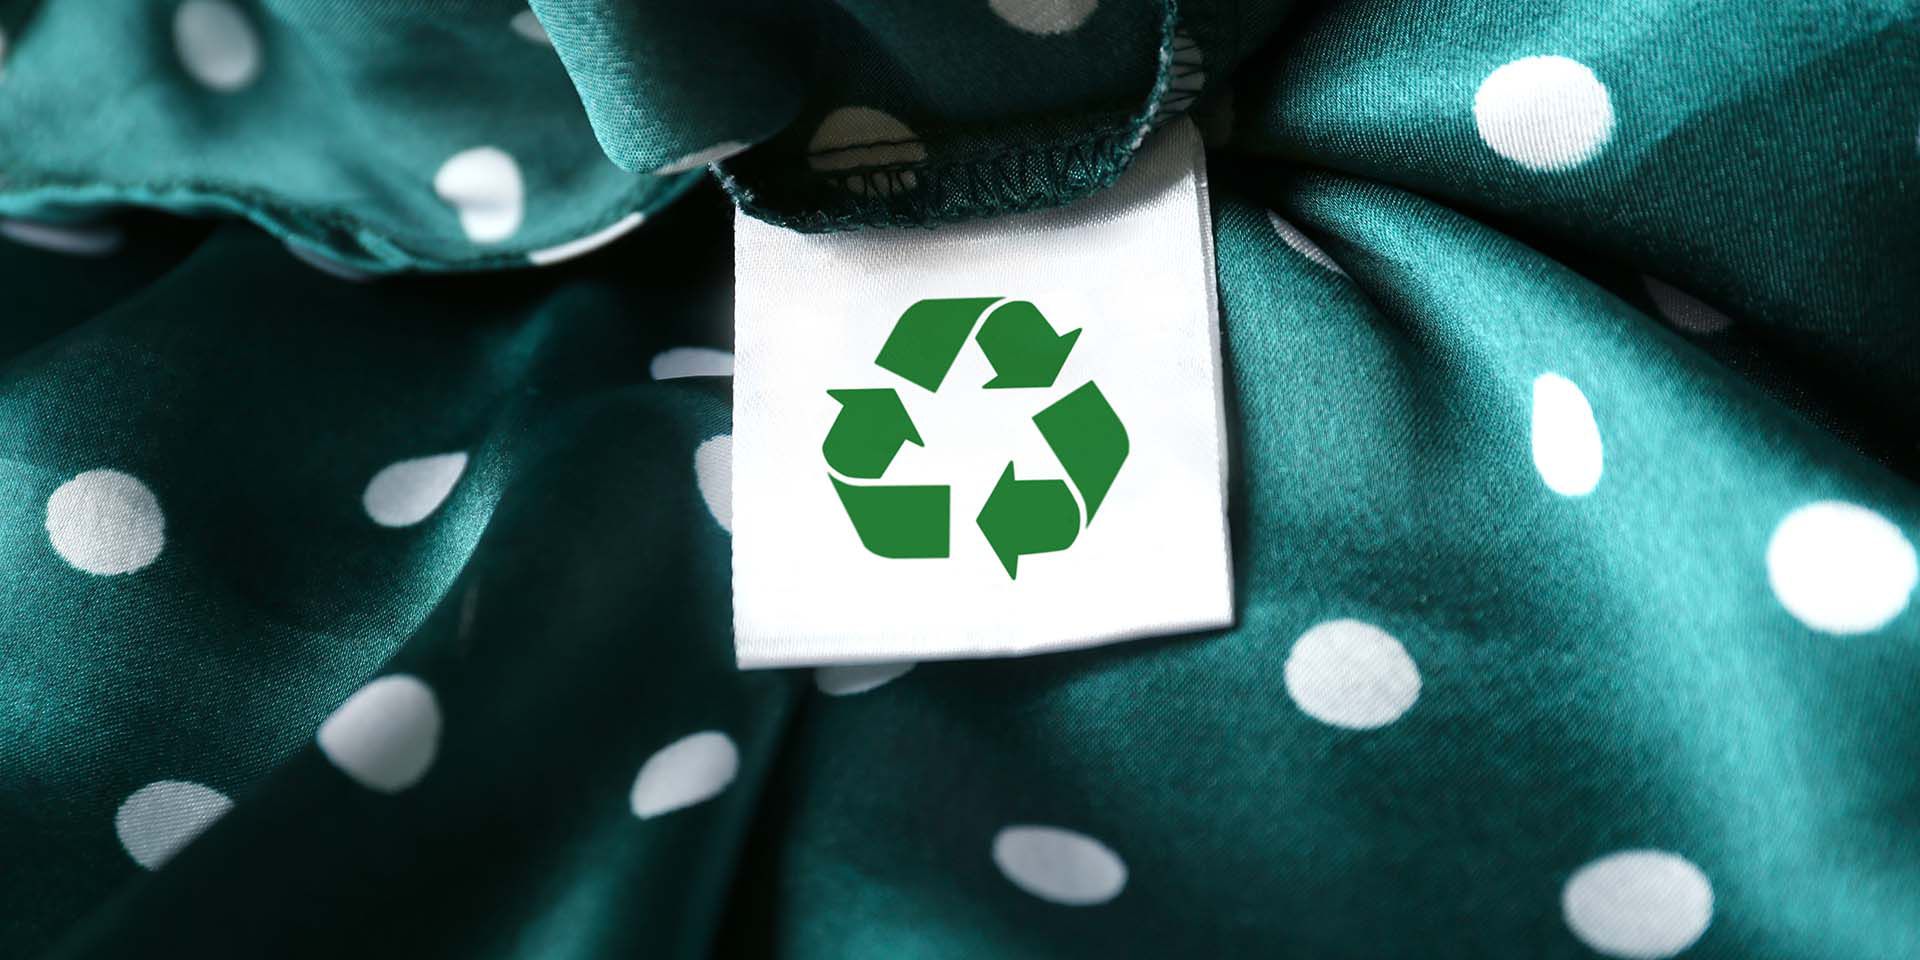 Clothing label with recycling symbol on green garment, closeup